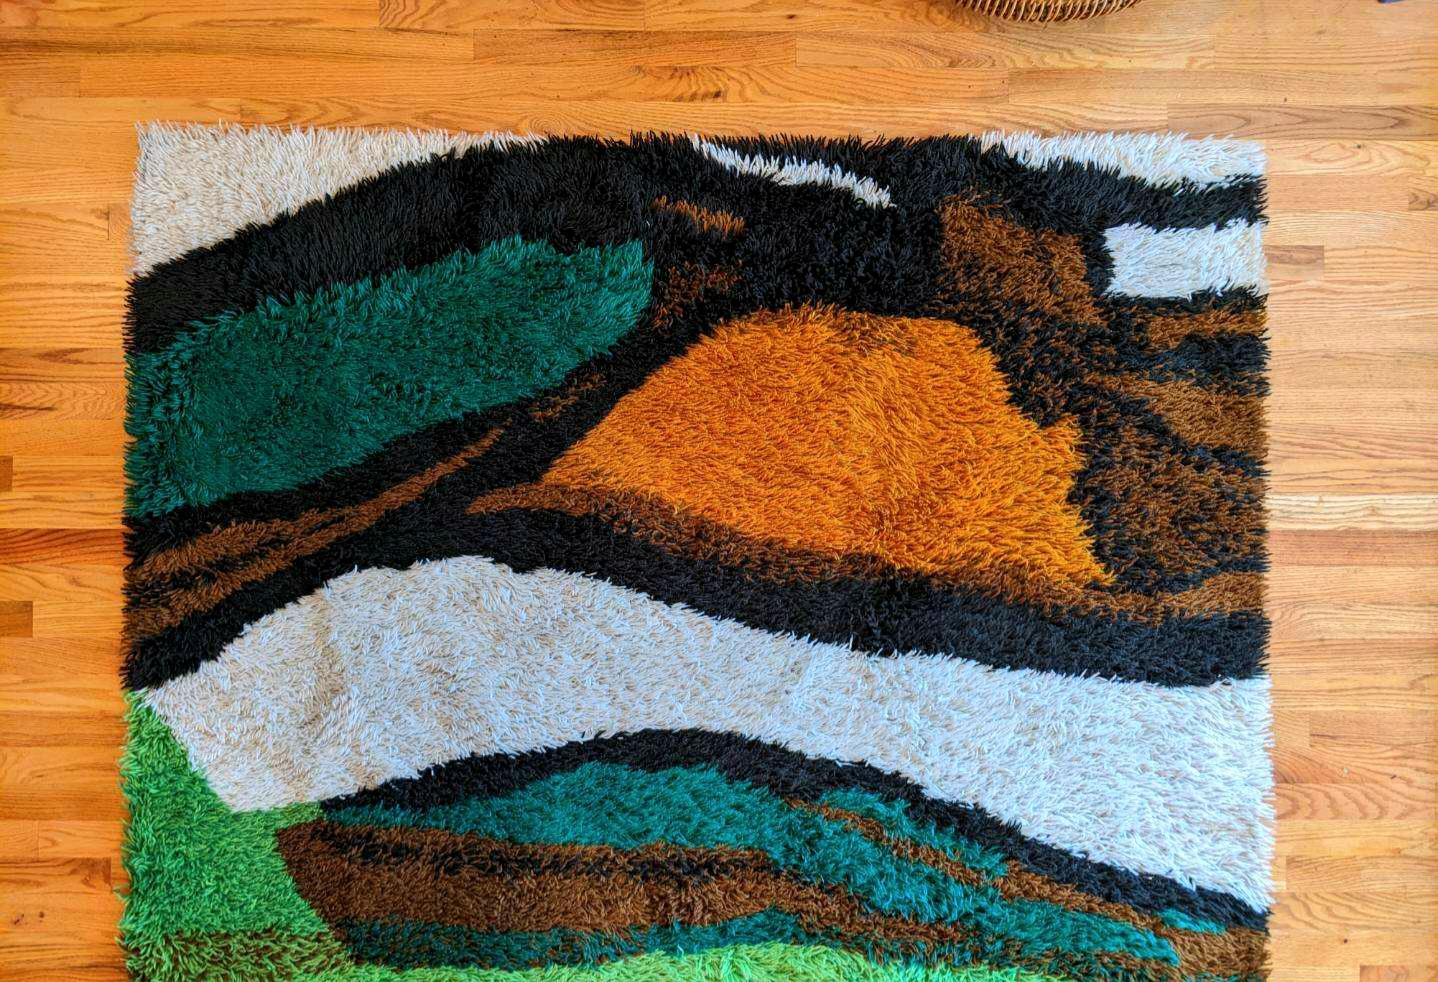 1960s RYA rug made in Denmark. This rug contains lovely earth tones I've never seen in a RYA rug before.